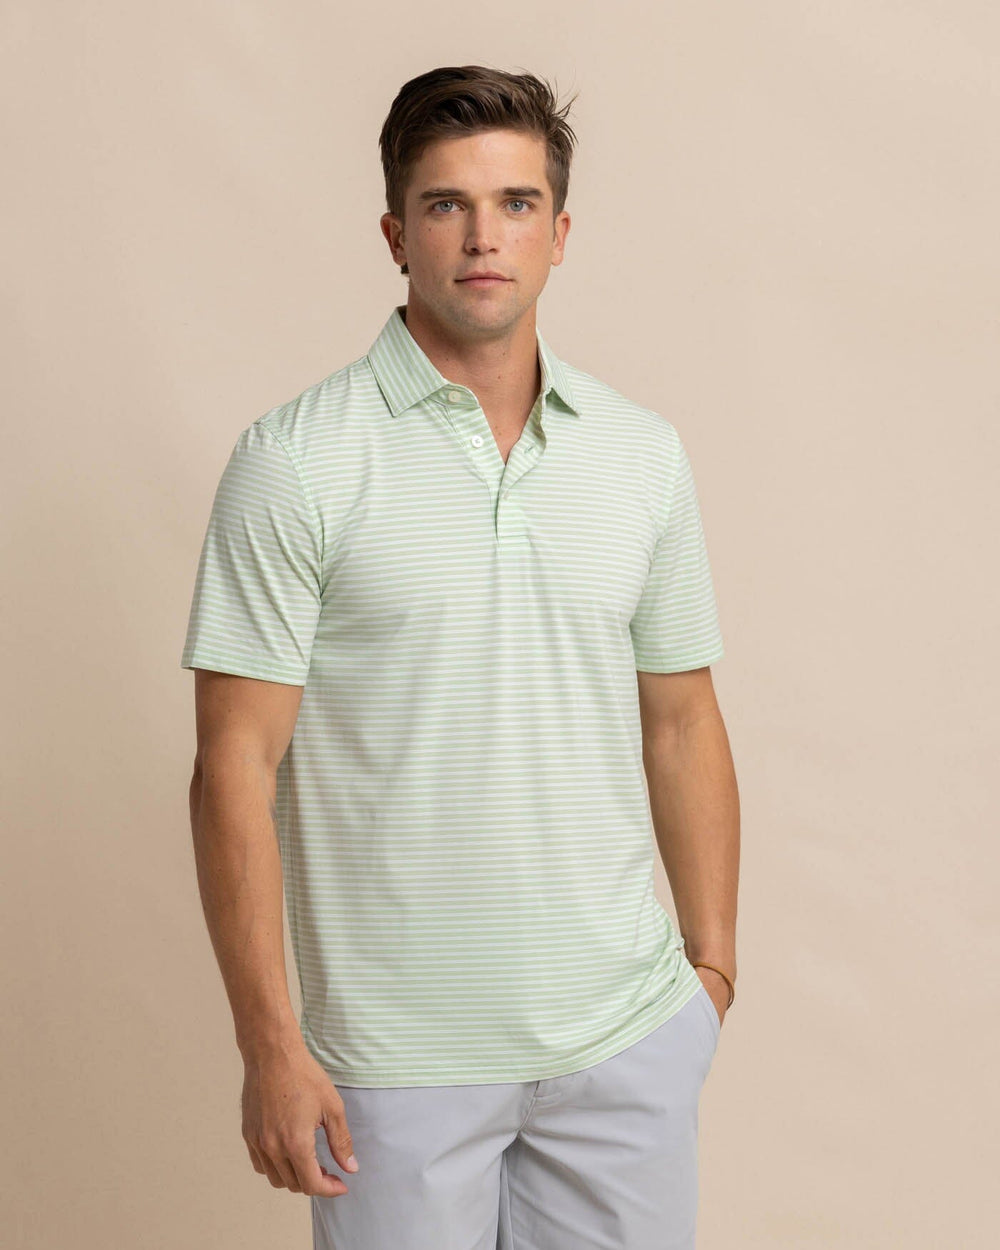 The front view of the Southern Tide brrr eeze Beattie Stripe Performance Polo by Southern Tide - Smoke Green